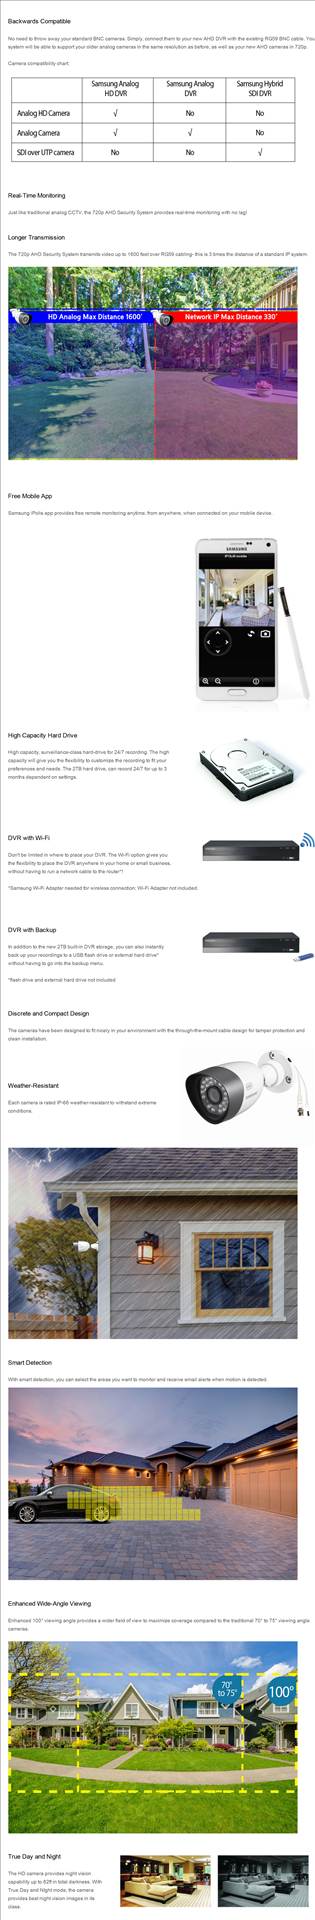 Samsung SDH-C5100 16 Channel 720p HD DVR Video Security System-1.png  by tnte